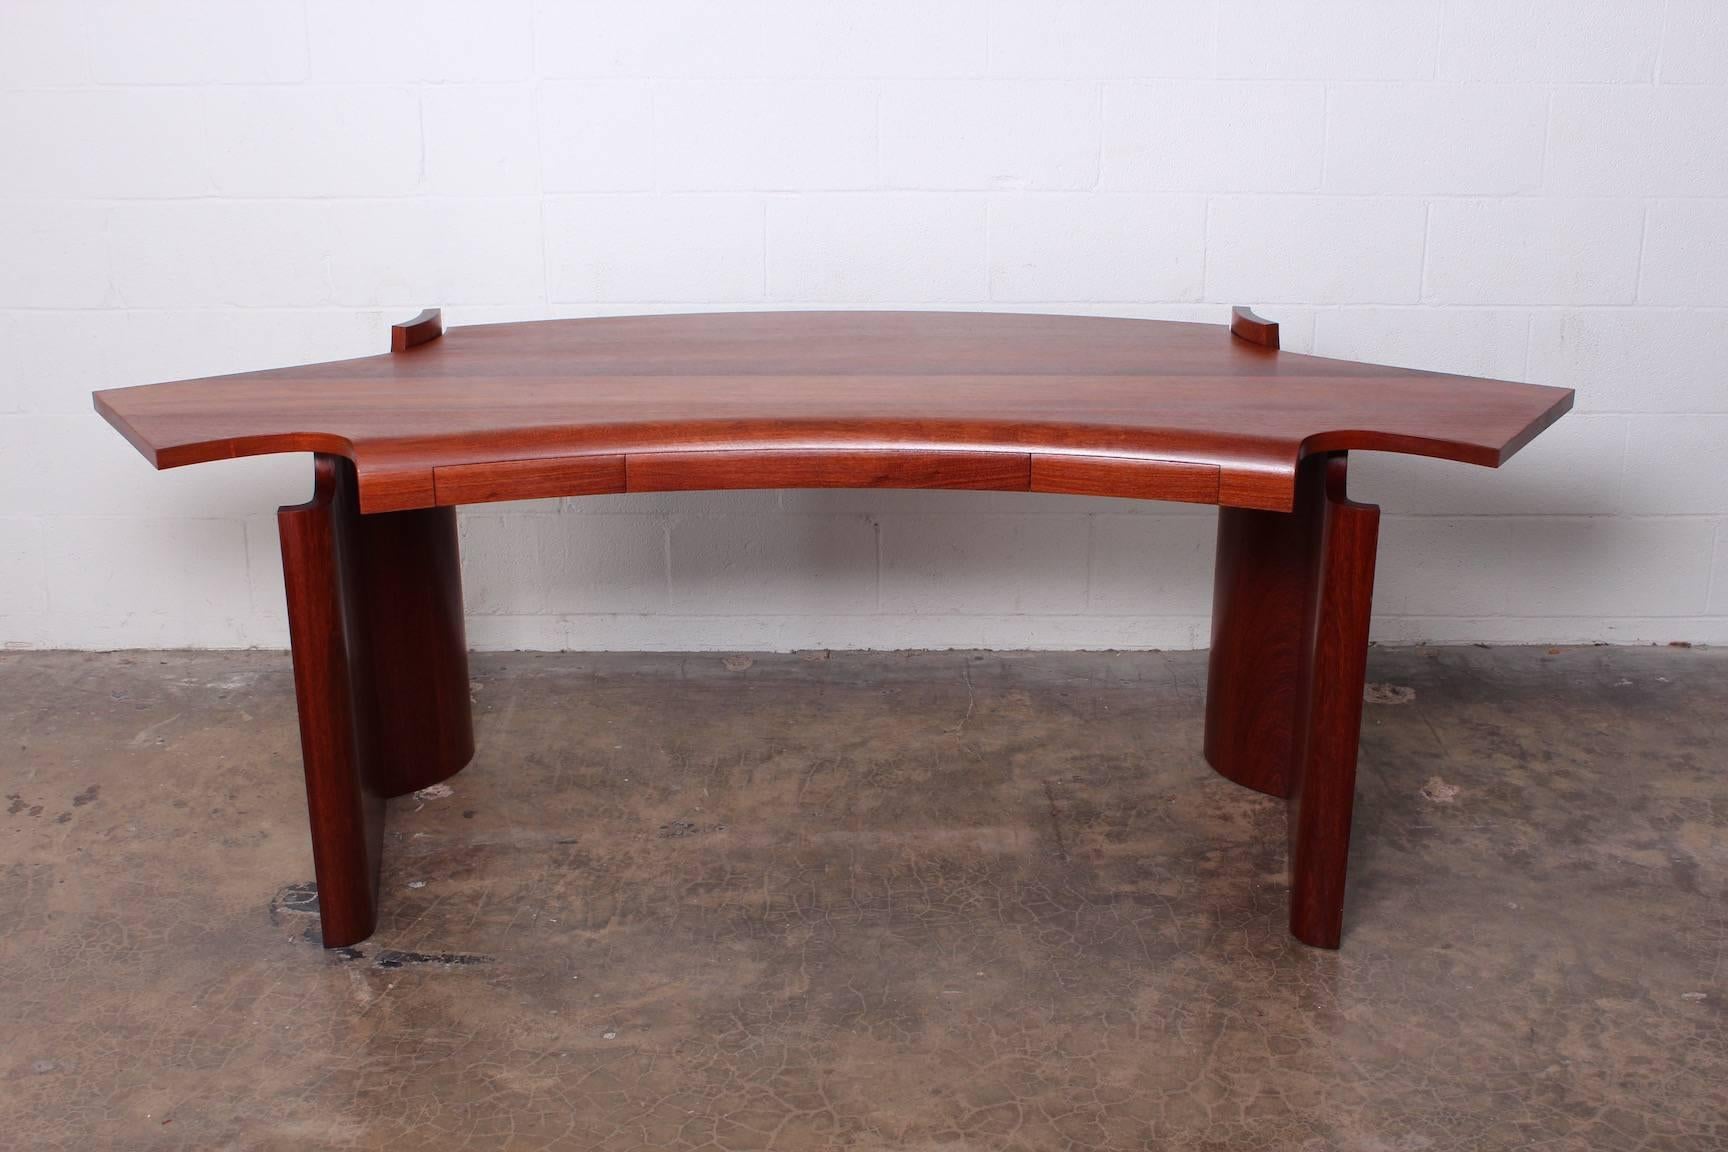 A beautifully crafted desk by artist John Dodd, 1970s.